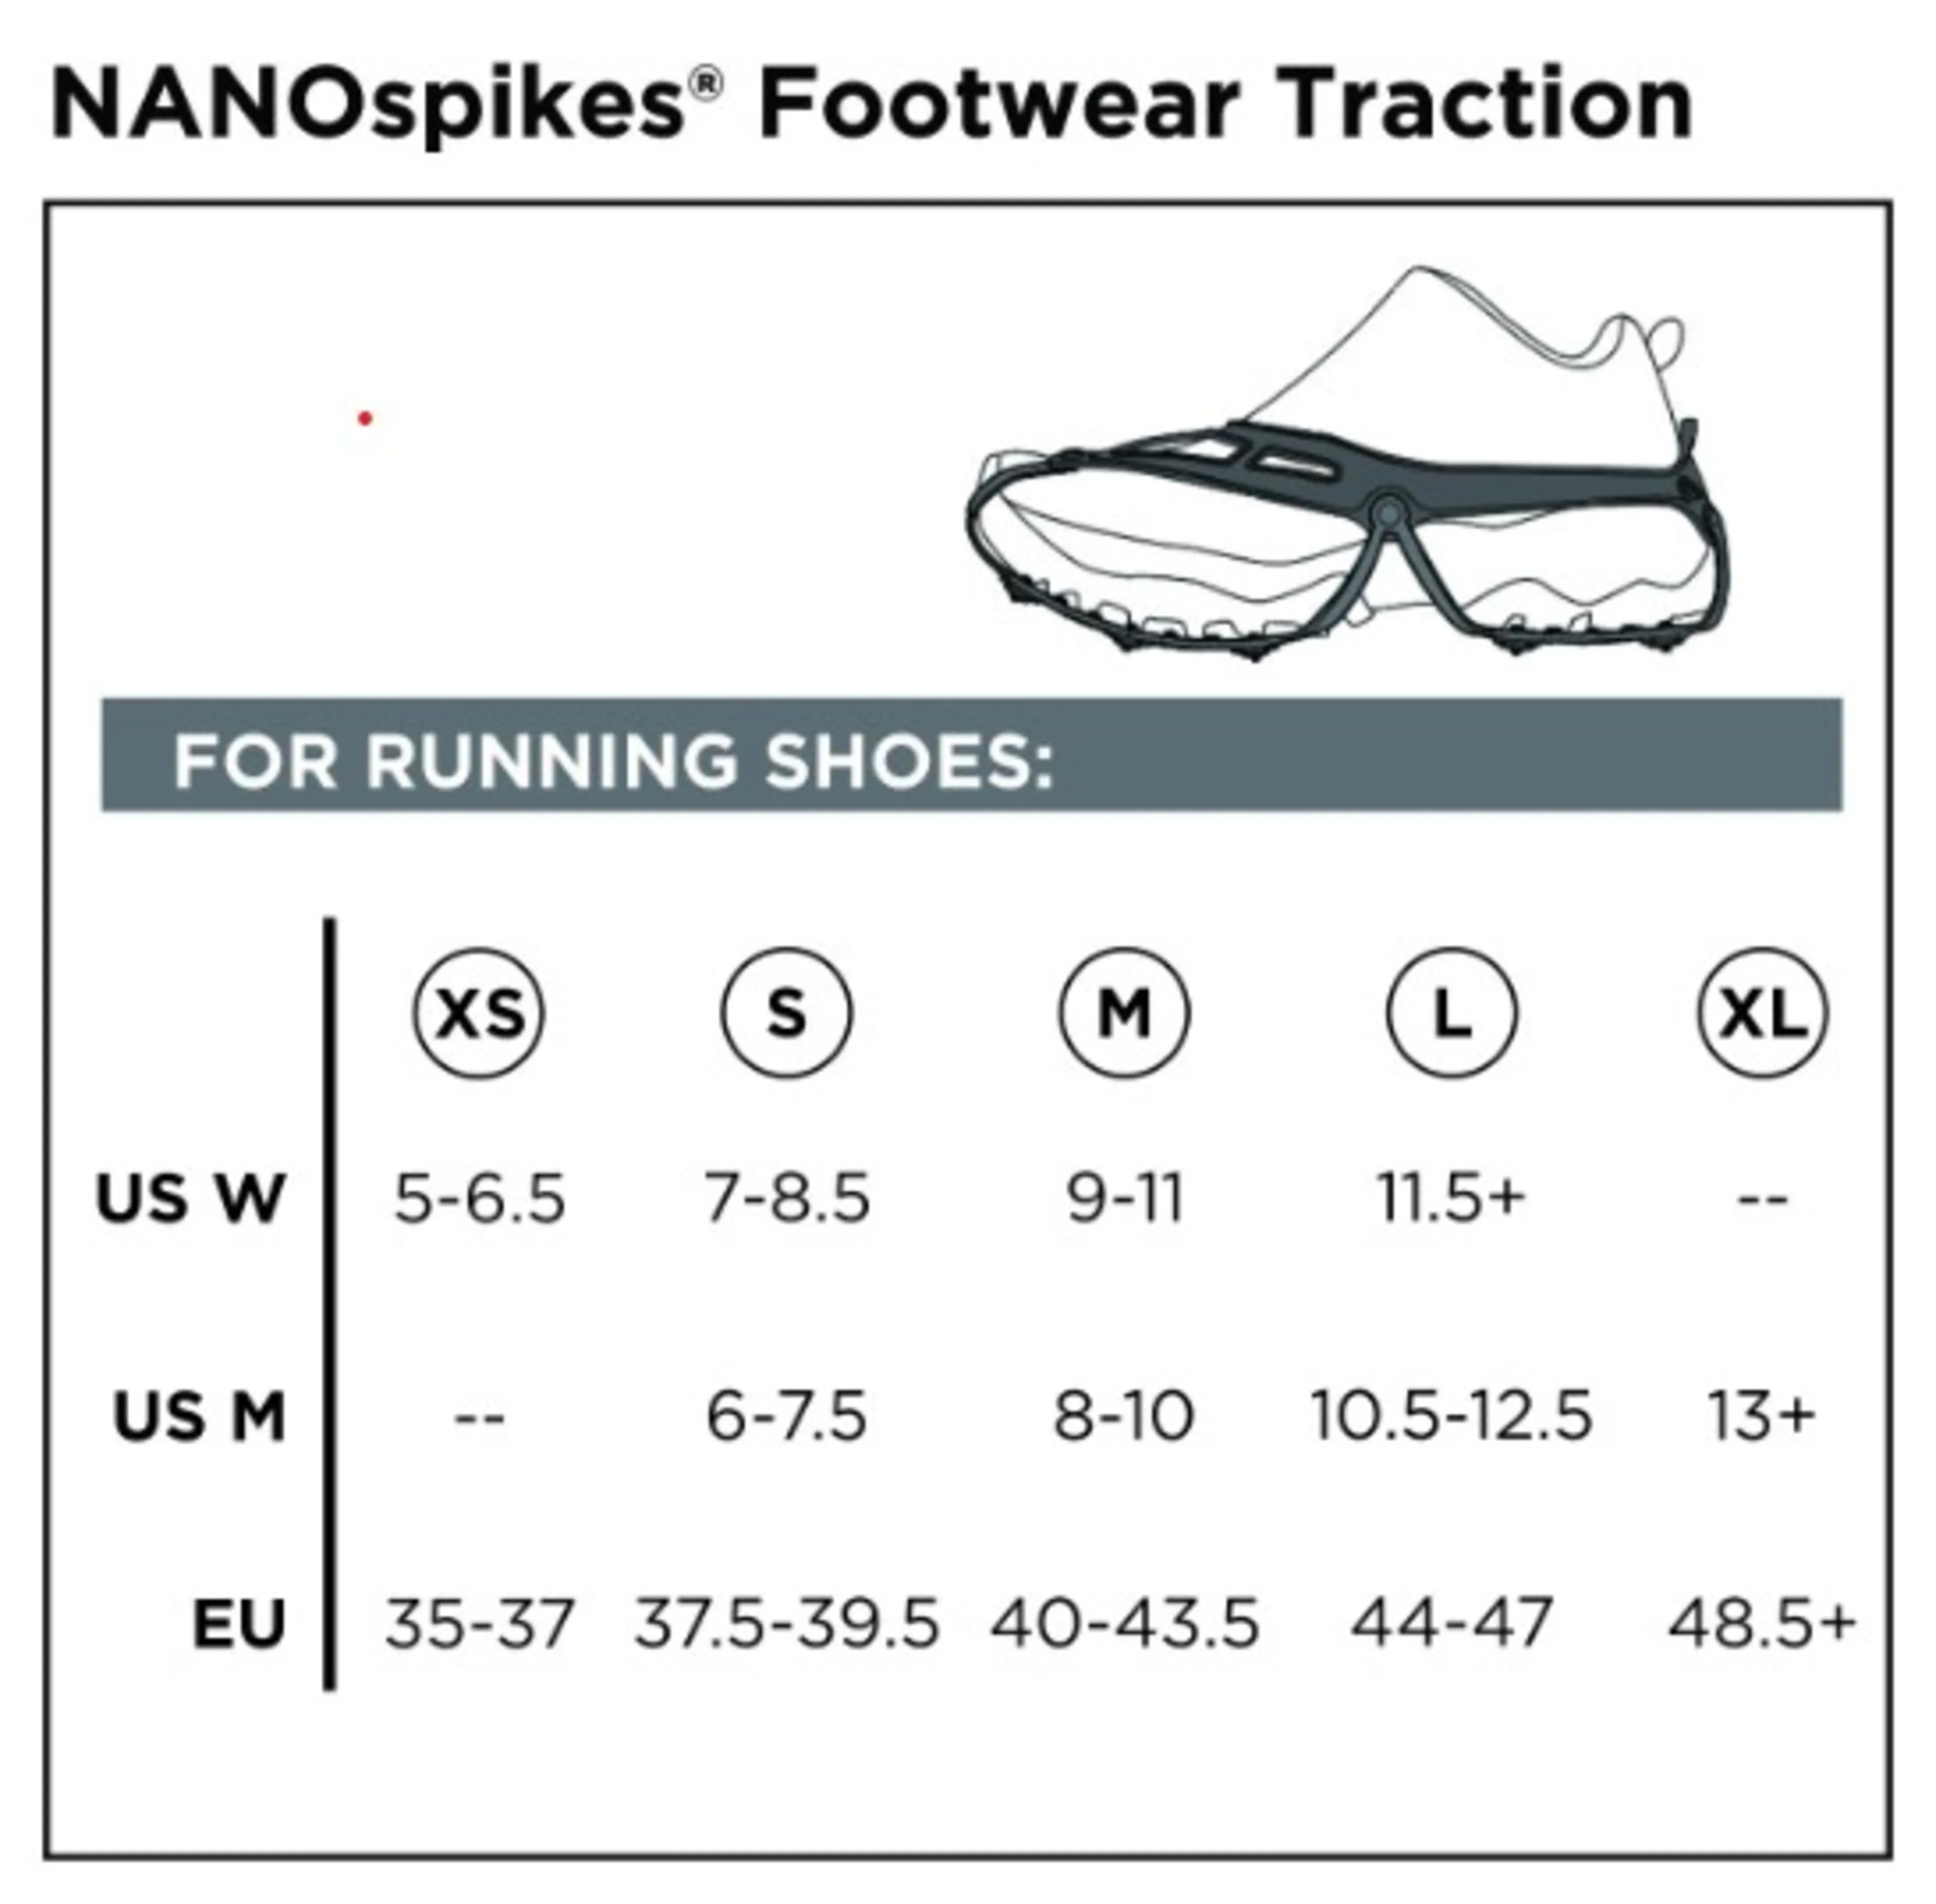 NANOspikes Footwear Traction v2, XL